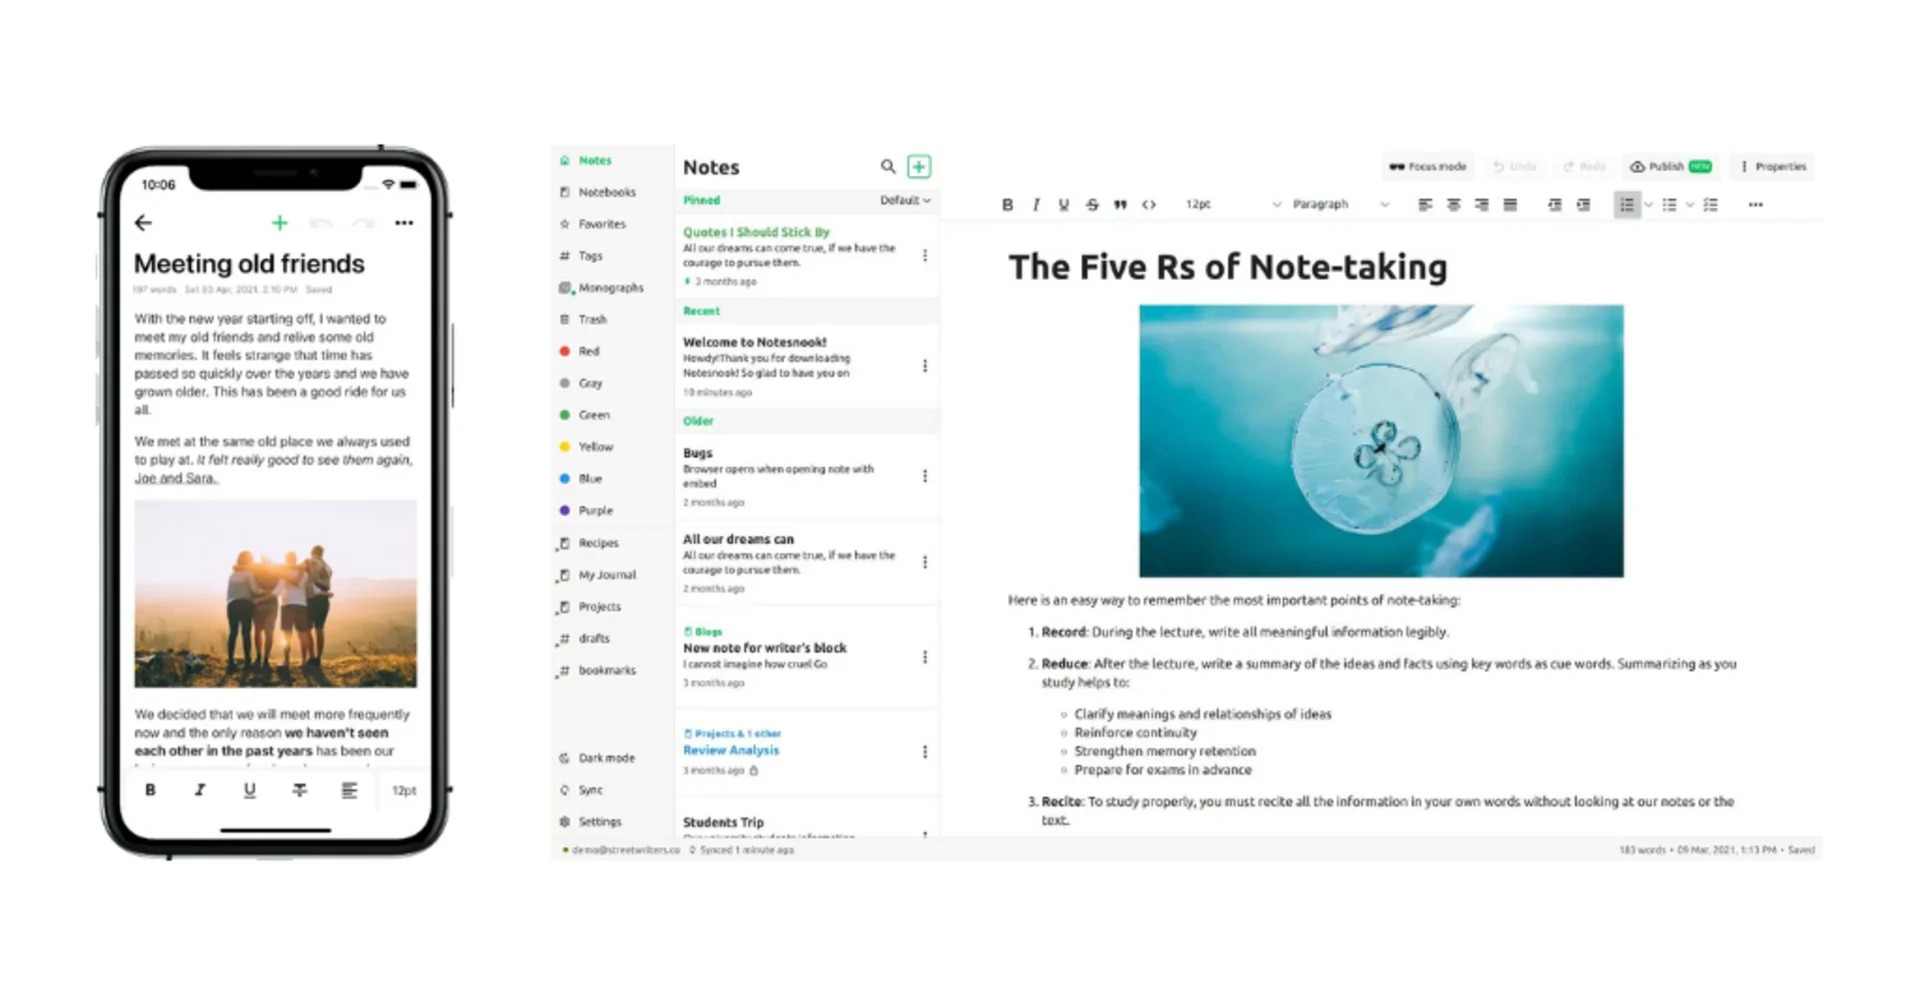 Notesnook secure note-taking app on mobile devices and the web.